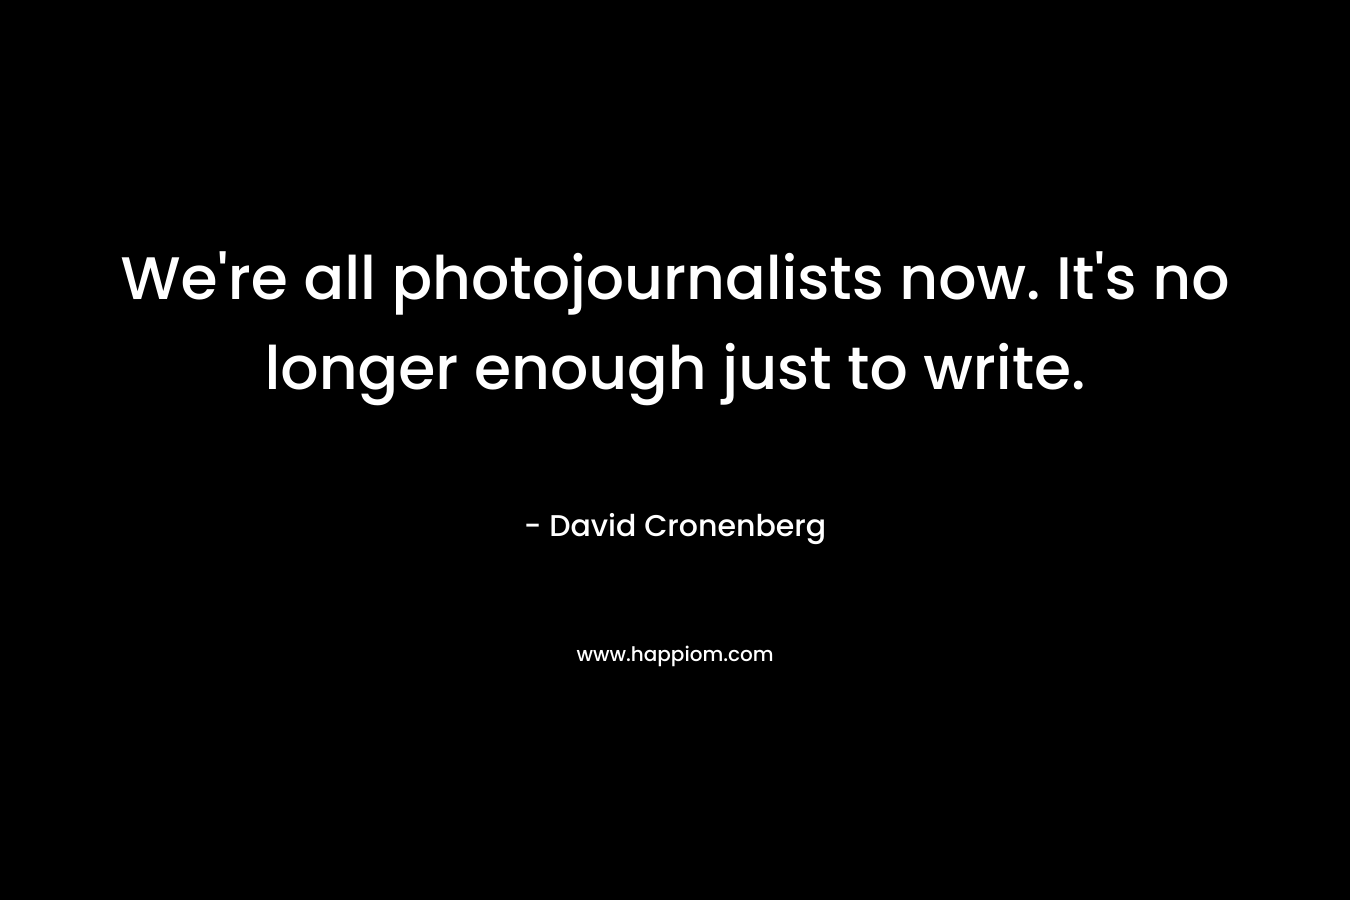 We’re all photojournalists now. It’s no longer enough just to write. – David Cronenberg